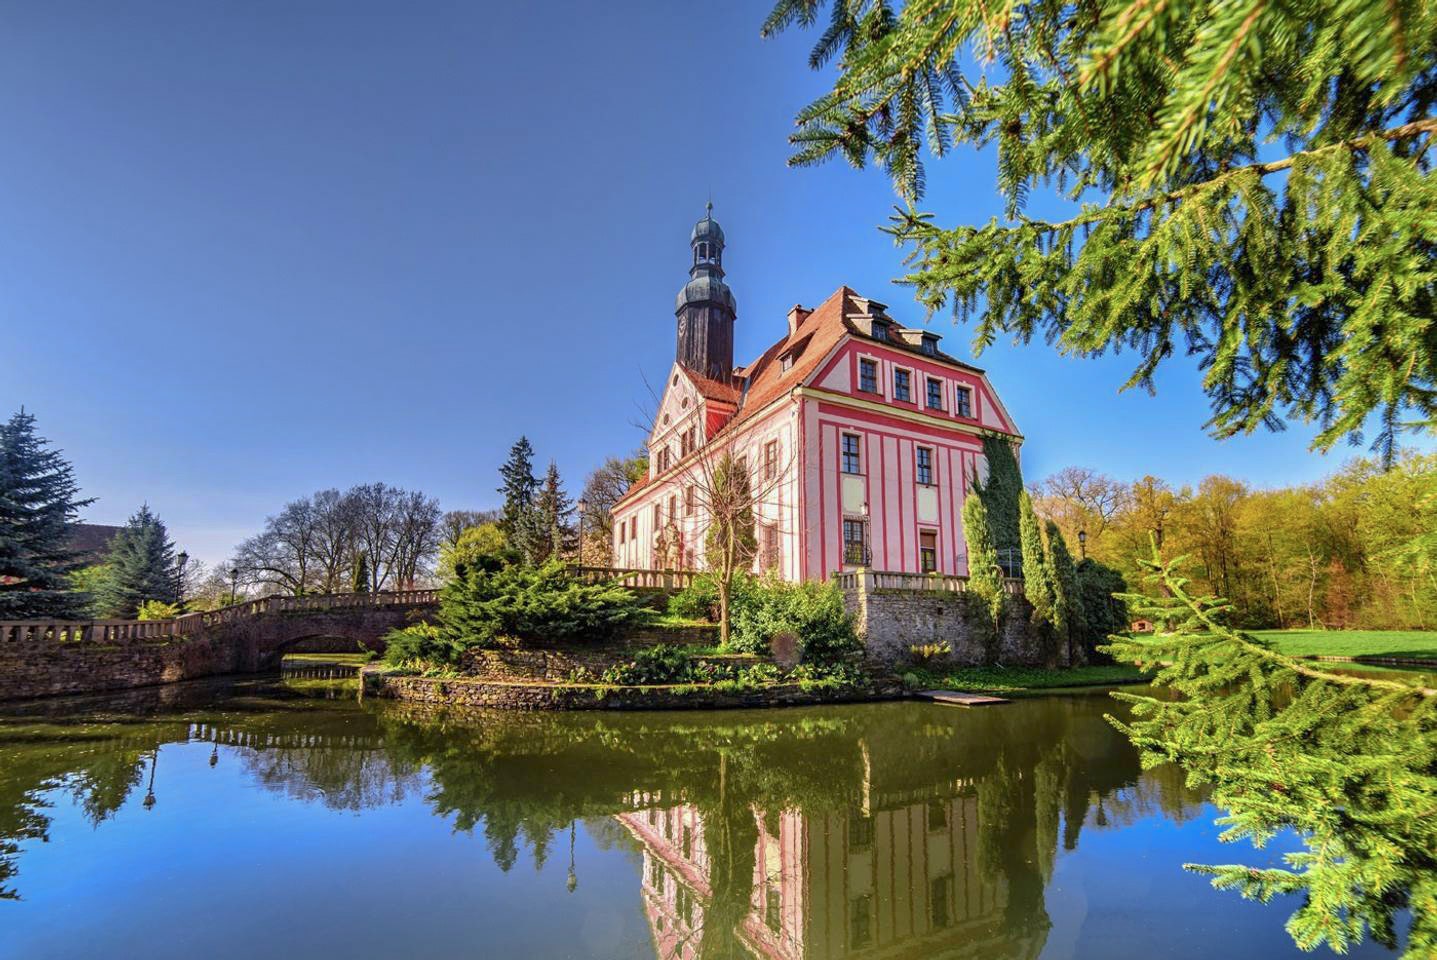 It's rare to find a pink—yes, pink—castle. This historic spot located in the Legnica area of Poland is set up more as a B&B than a typical Airbnb castle and the hosts live on the ground floor. Rent any of the five double rooms covered in traditional wallpaper, each with their own private, modern bathroom. The property is a real treat for animal lovers: You'll see dogs, cats, birds, fallow deers, and more in the beautiful private forest. $418, Airbnb (Starting Price). <a href="https://www.airbnb.com/rooms/868721?irgwc=1&irclid=2QtXMuWh4xyIR4lR3A15t2IMUkGTDmUyk1cN0A0&ircid=4273&sharedid=&af=49497874&iratid=9627&c=.pi73.pk4273_1297866&irparam1=&source_impression_id=p3_1647363459_1o95%2FA8Bd5jRLXII%27">Get it now!</a><p>Sign up to receive the latest news, expert tips, and inspiration on all things travel</p><a href="https://www.cntraveler.com/newsletter/the-daily?sourceCode=msnsend">Inspire Me</a>